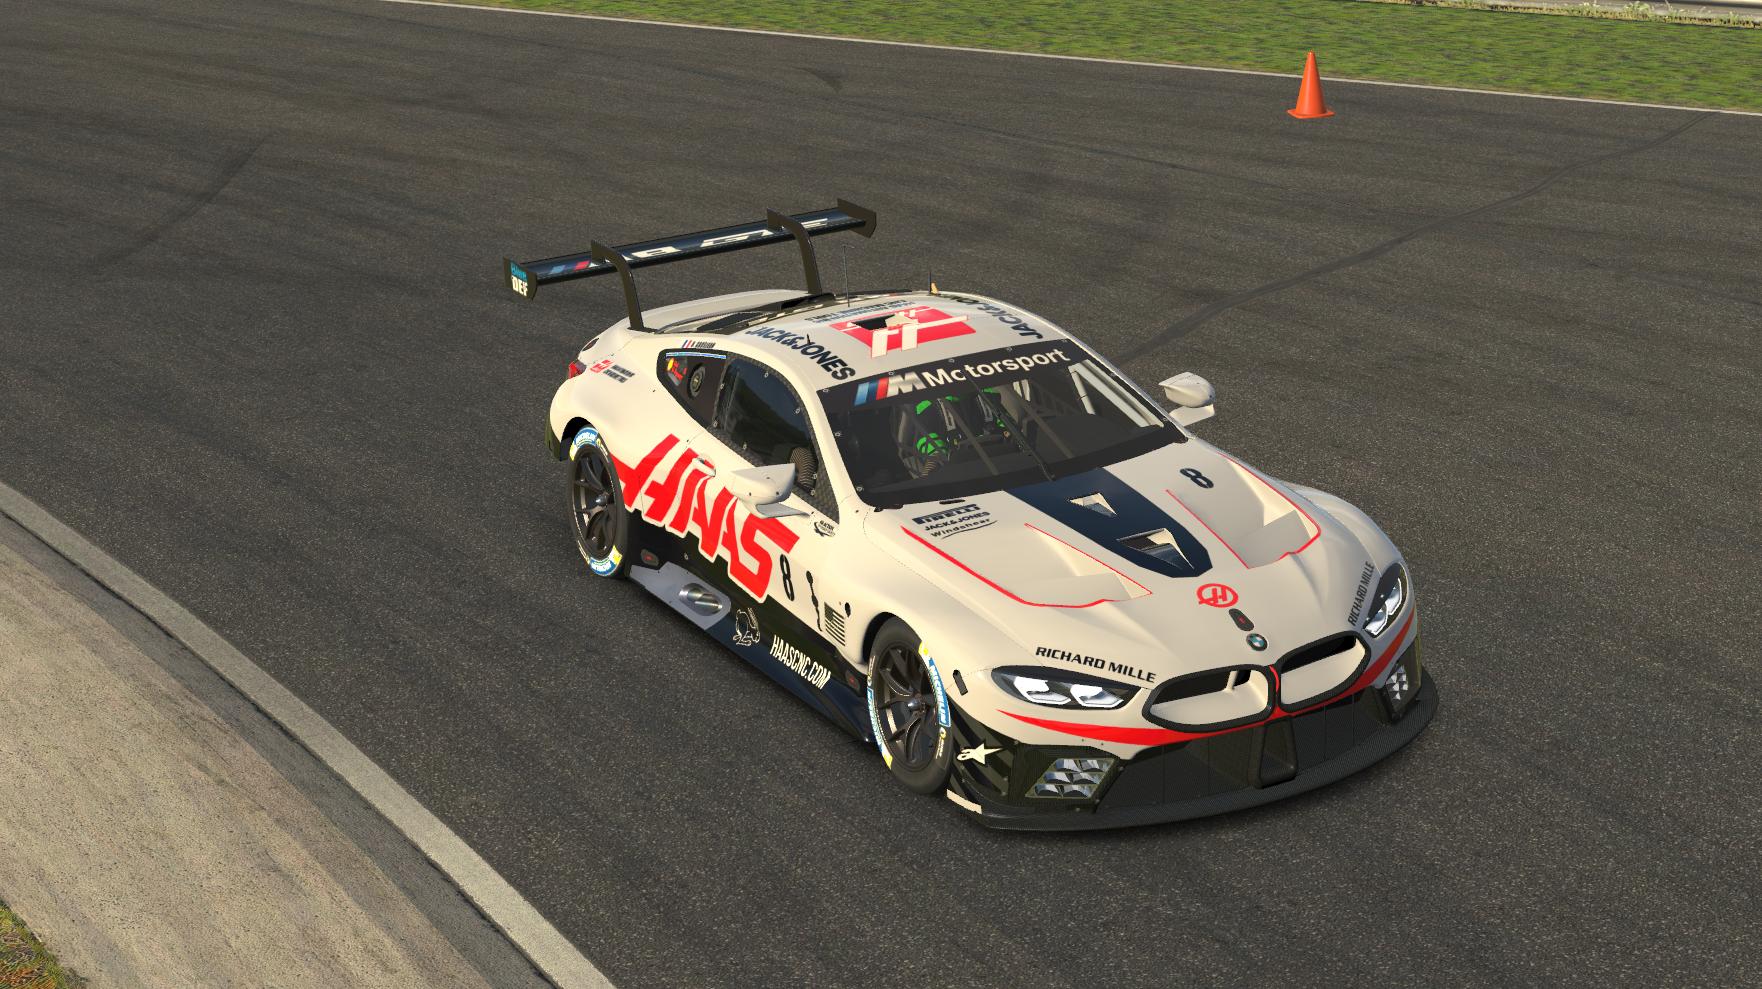 Preview of Haas F1 Romain Grosjean Livery - BMW M8 GTE by Gino Kelleners